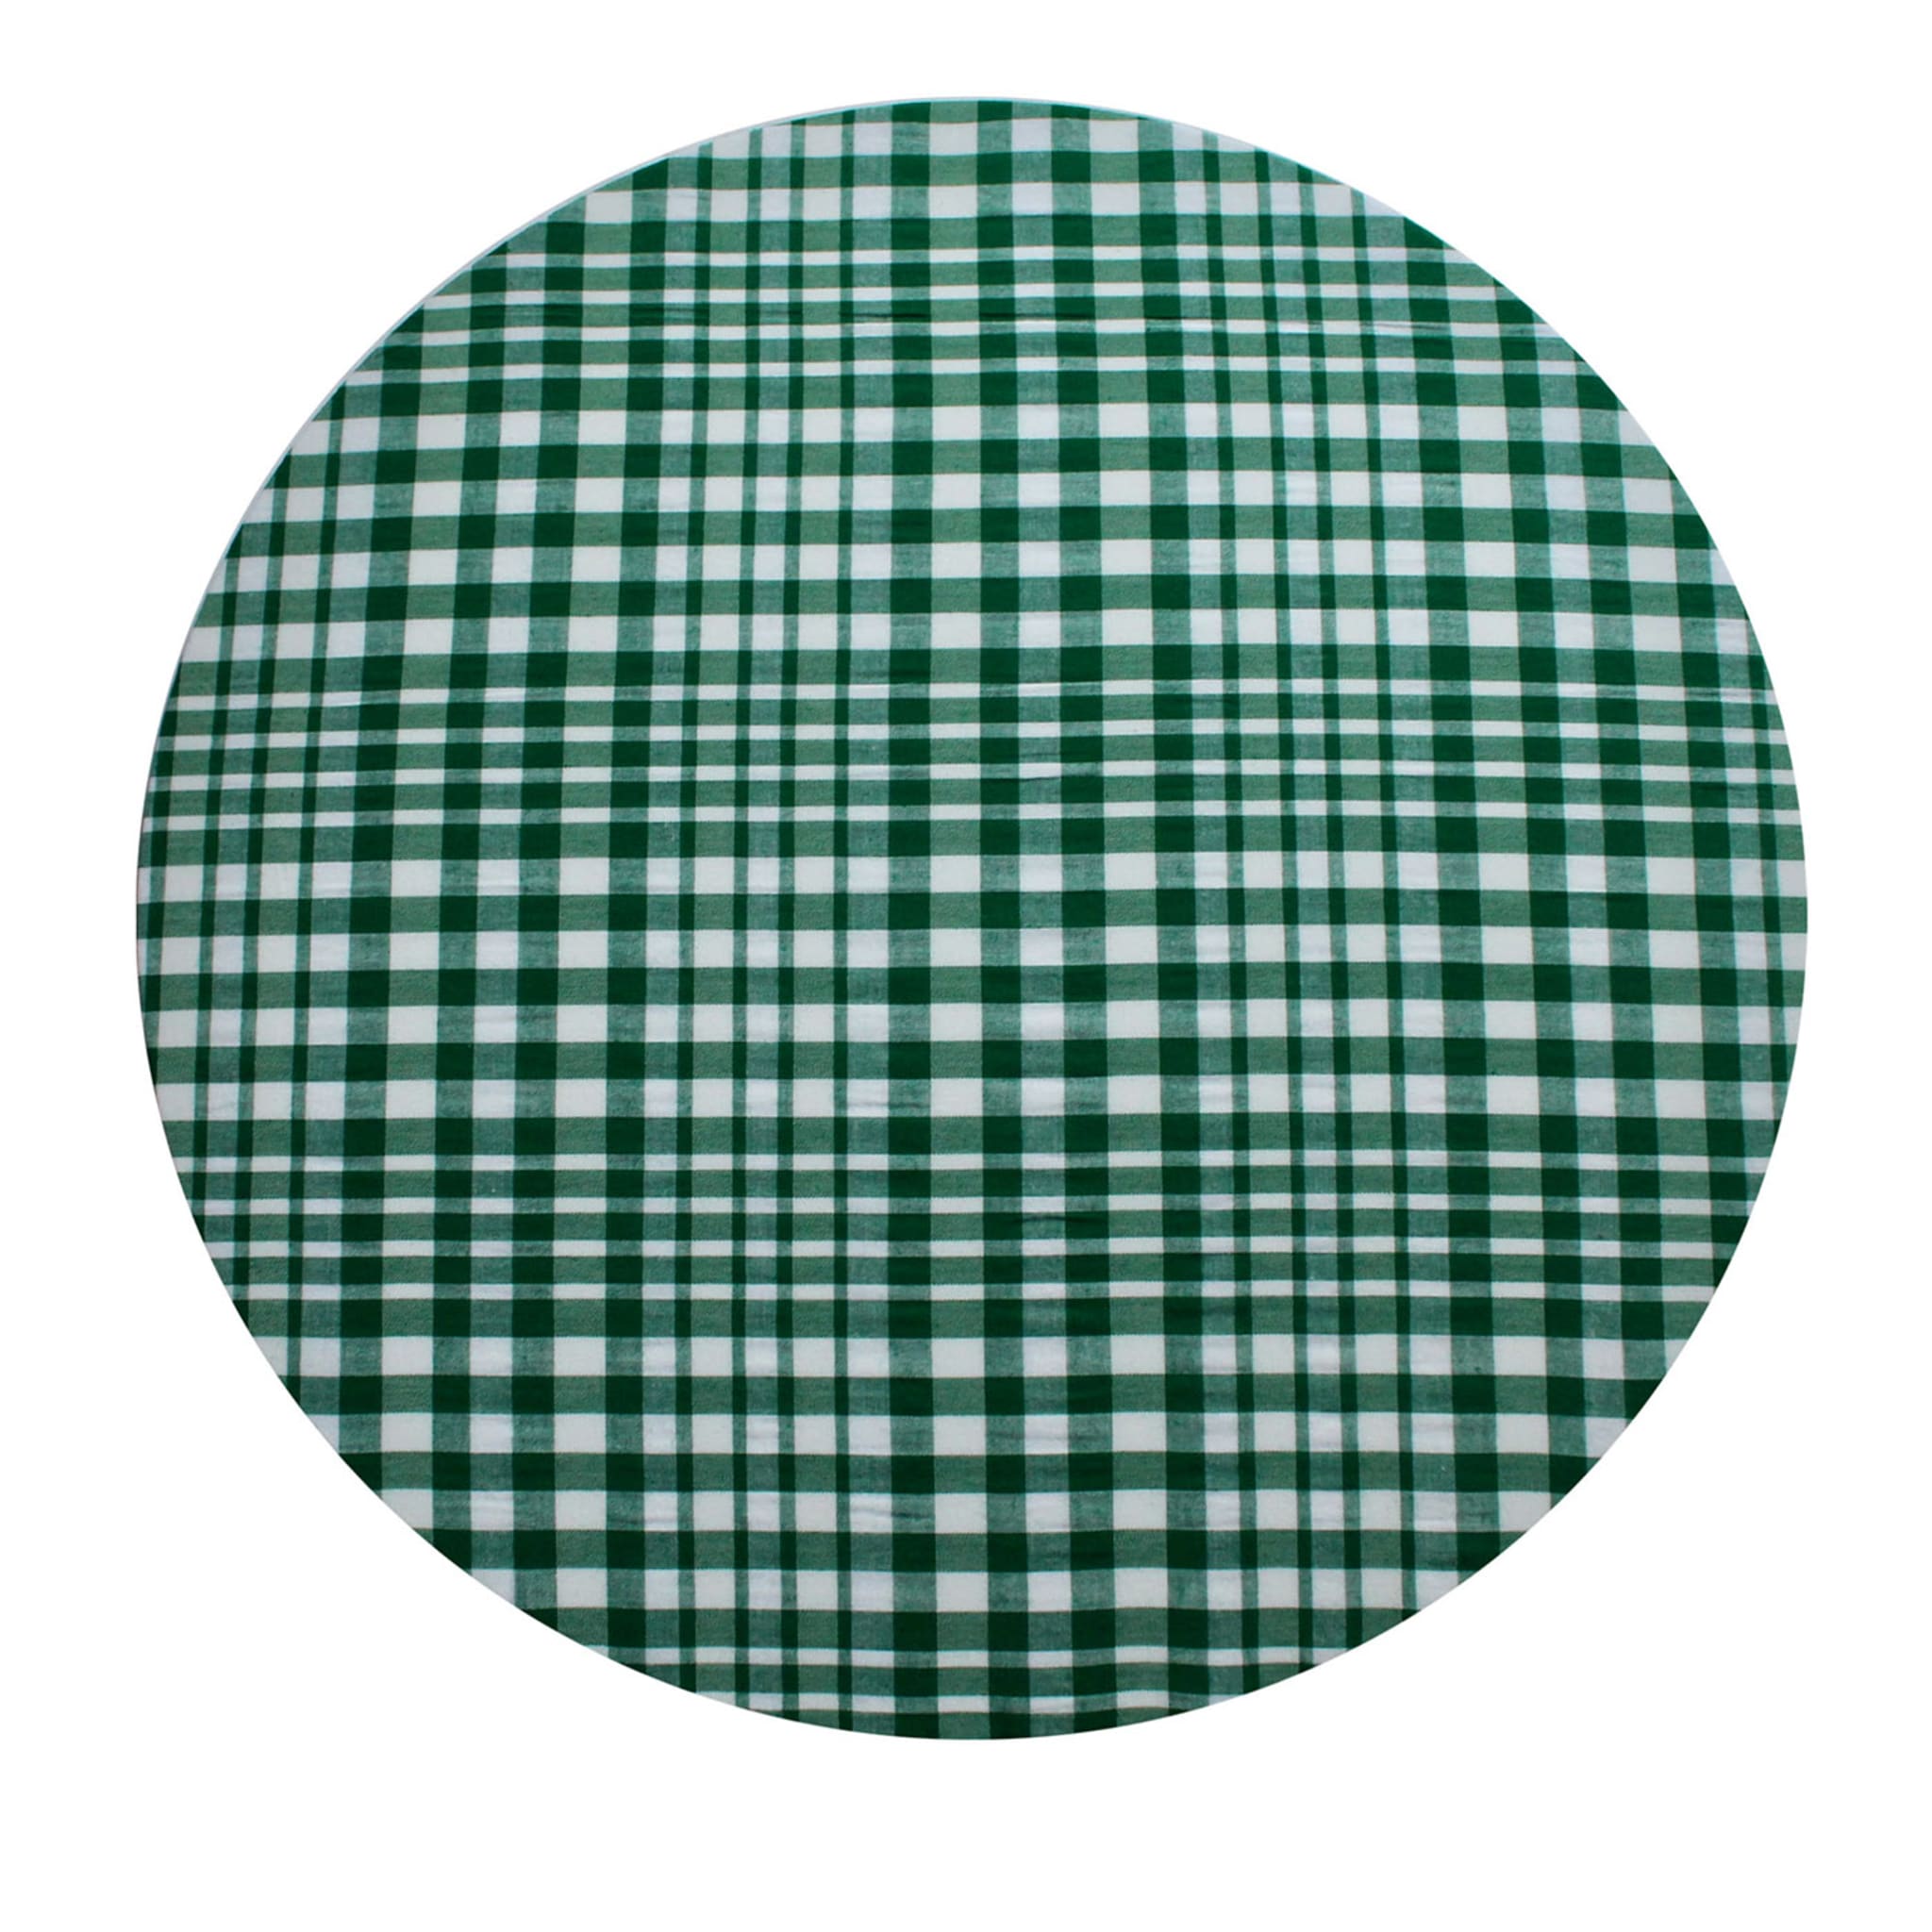 Cuffiette Check Round Green & White Placemat #2 - Main view